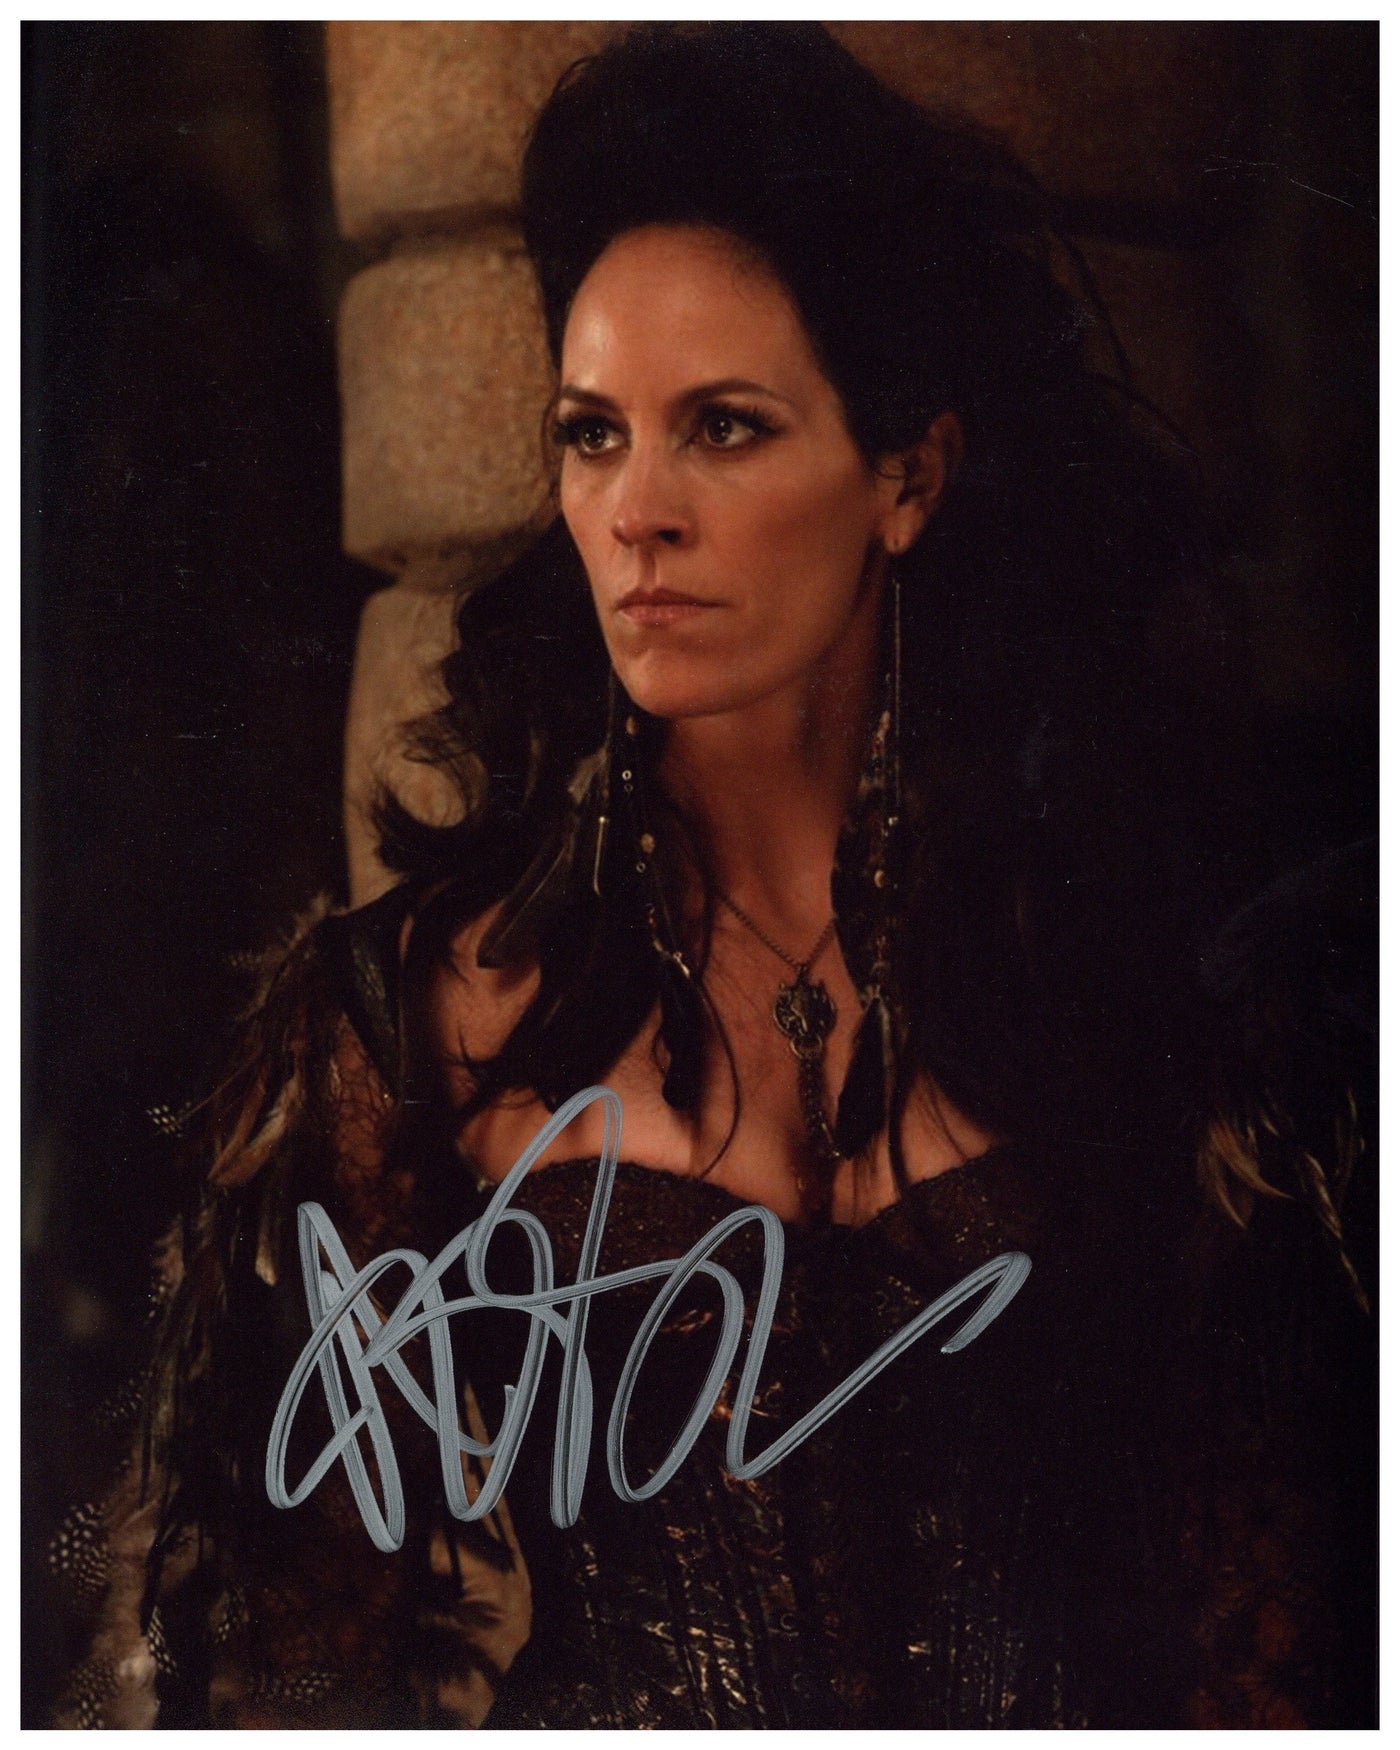 Annabeth Gish Signed 8x10 Photo Once Upon a Time Autographed ACOA 90